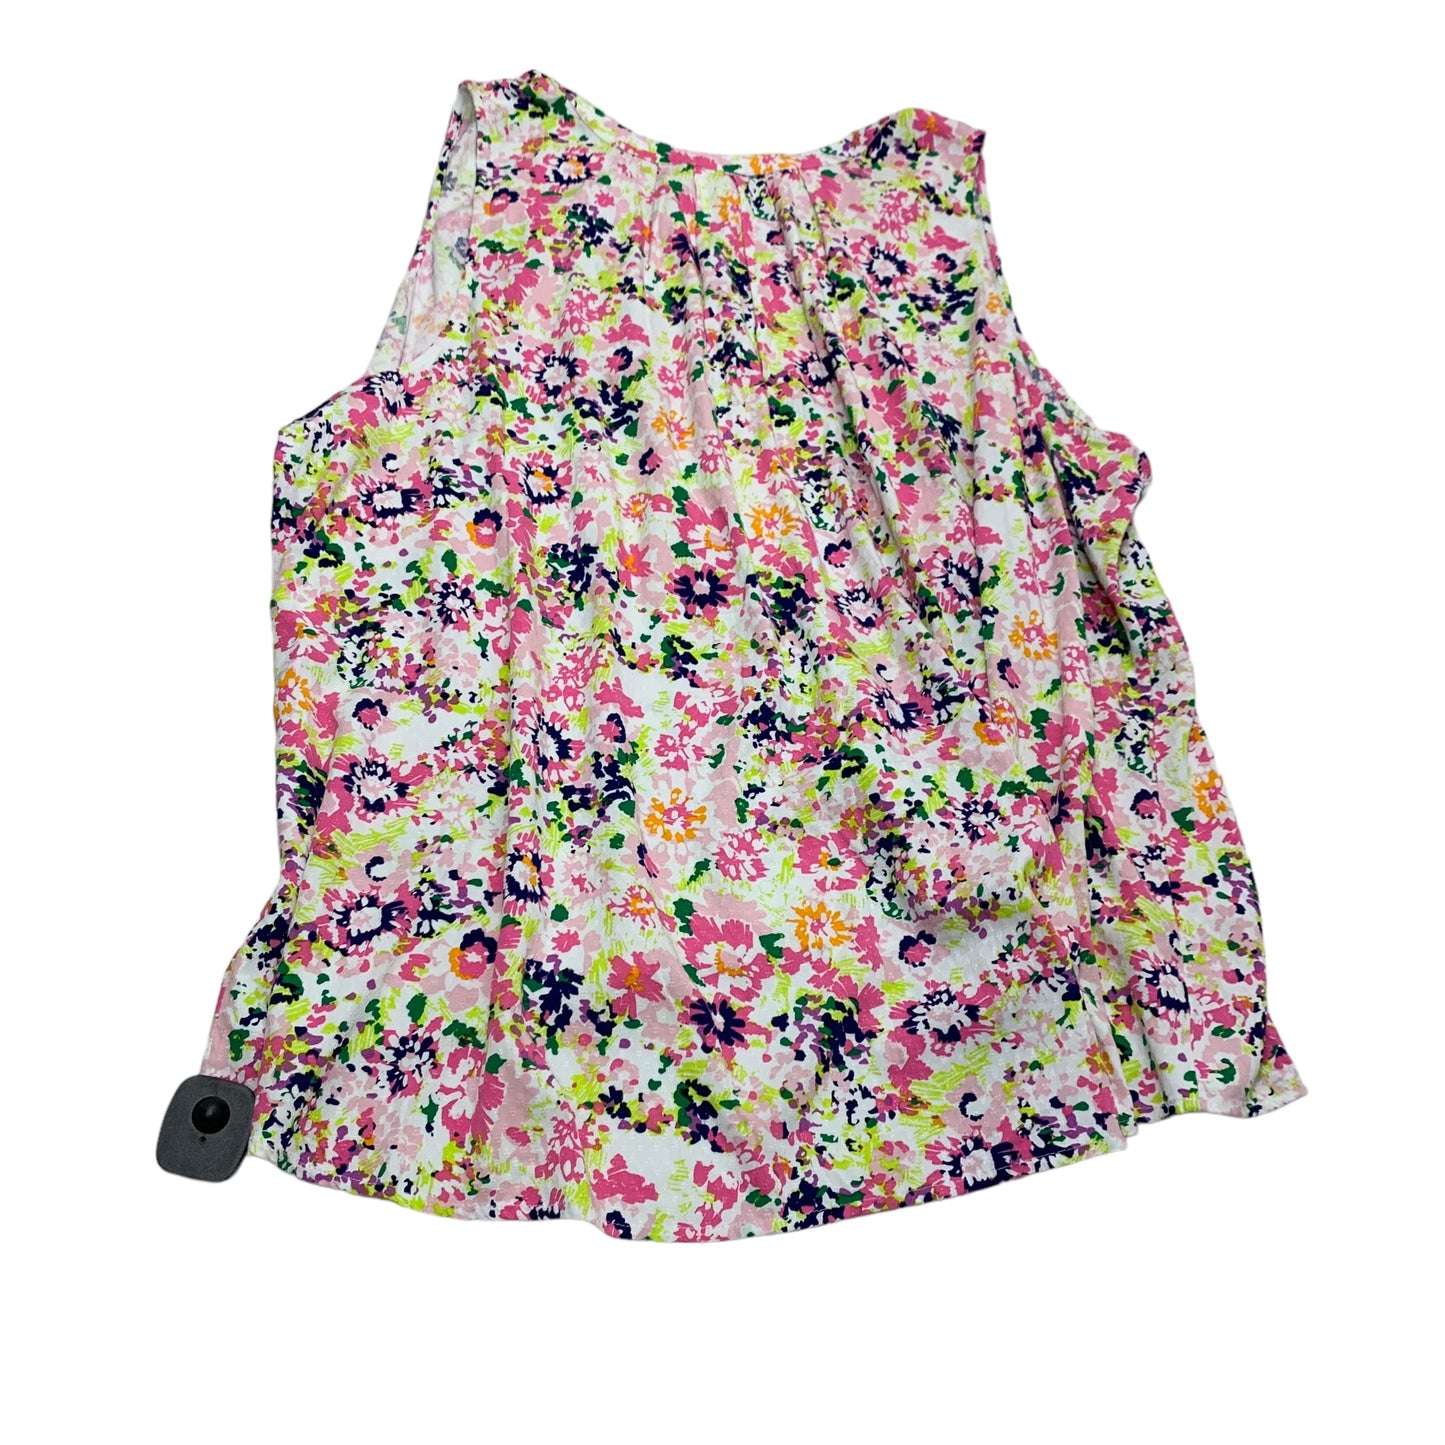 Top Sleeveless By Crown And Ivy  Size: 4x